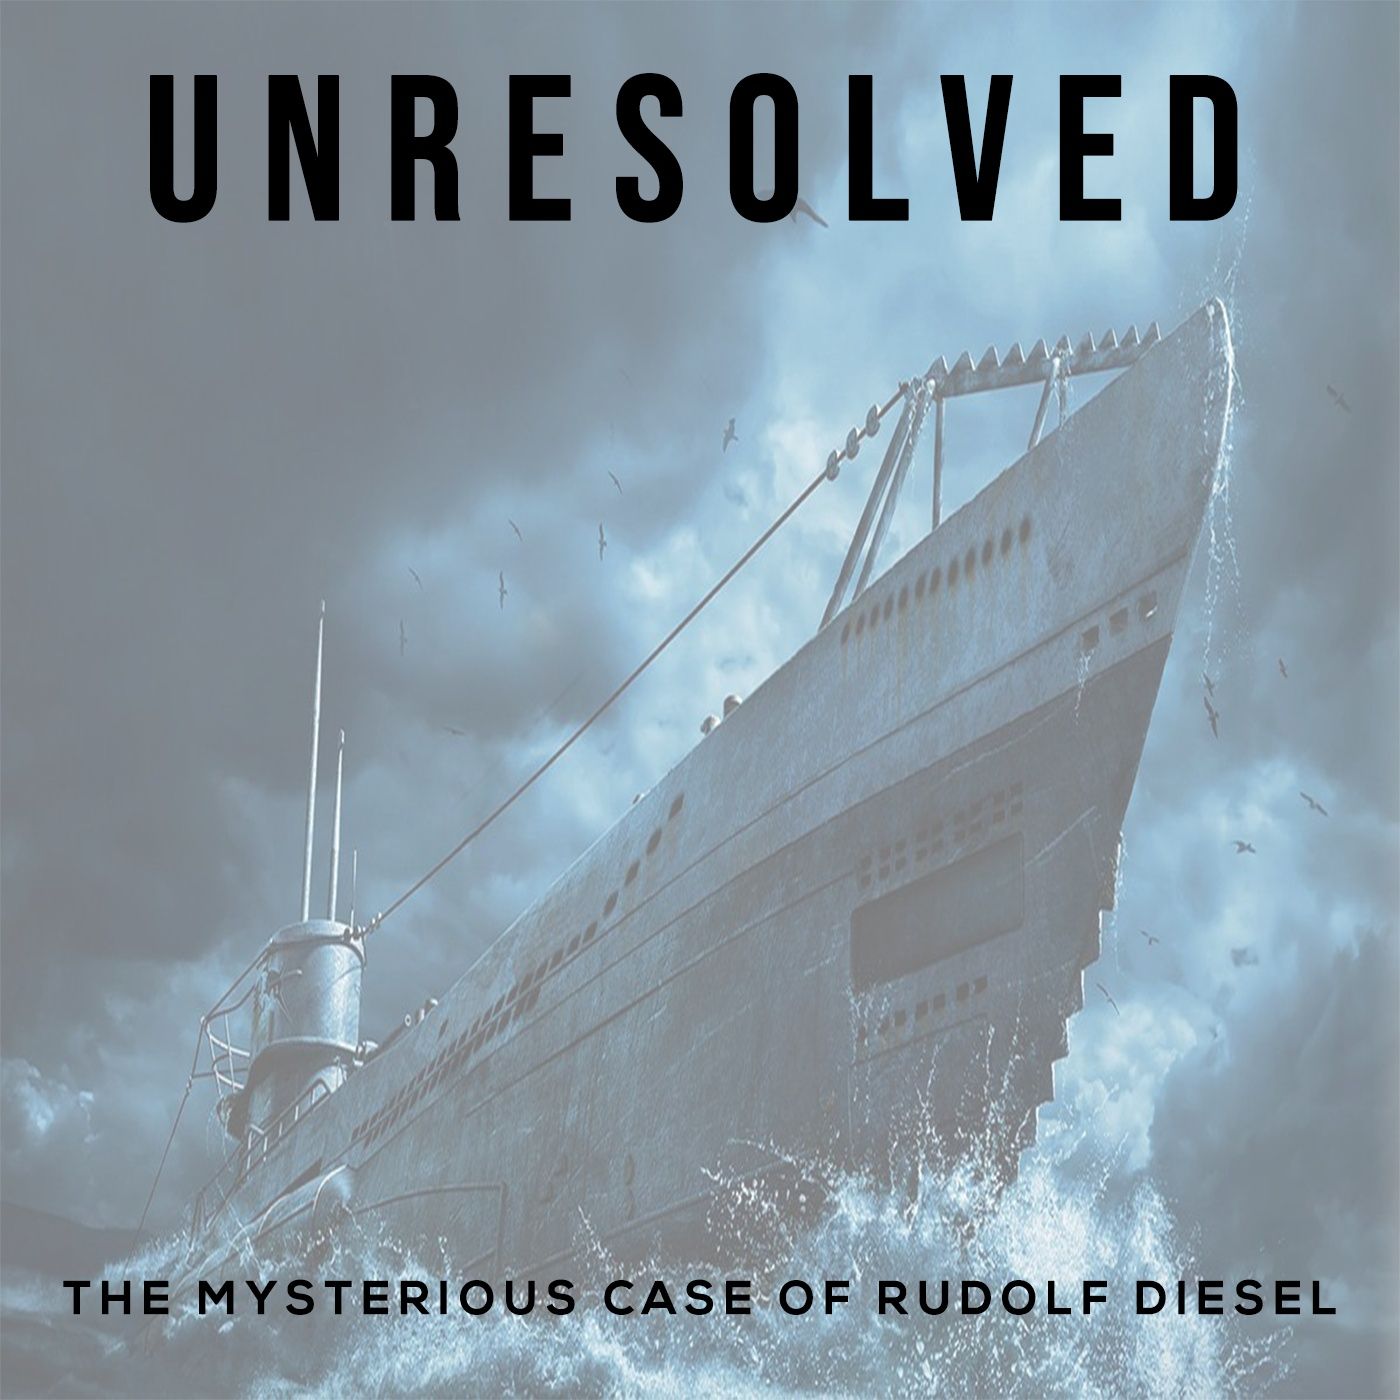 ’The Mysterious Case of Rudolf Diesel’